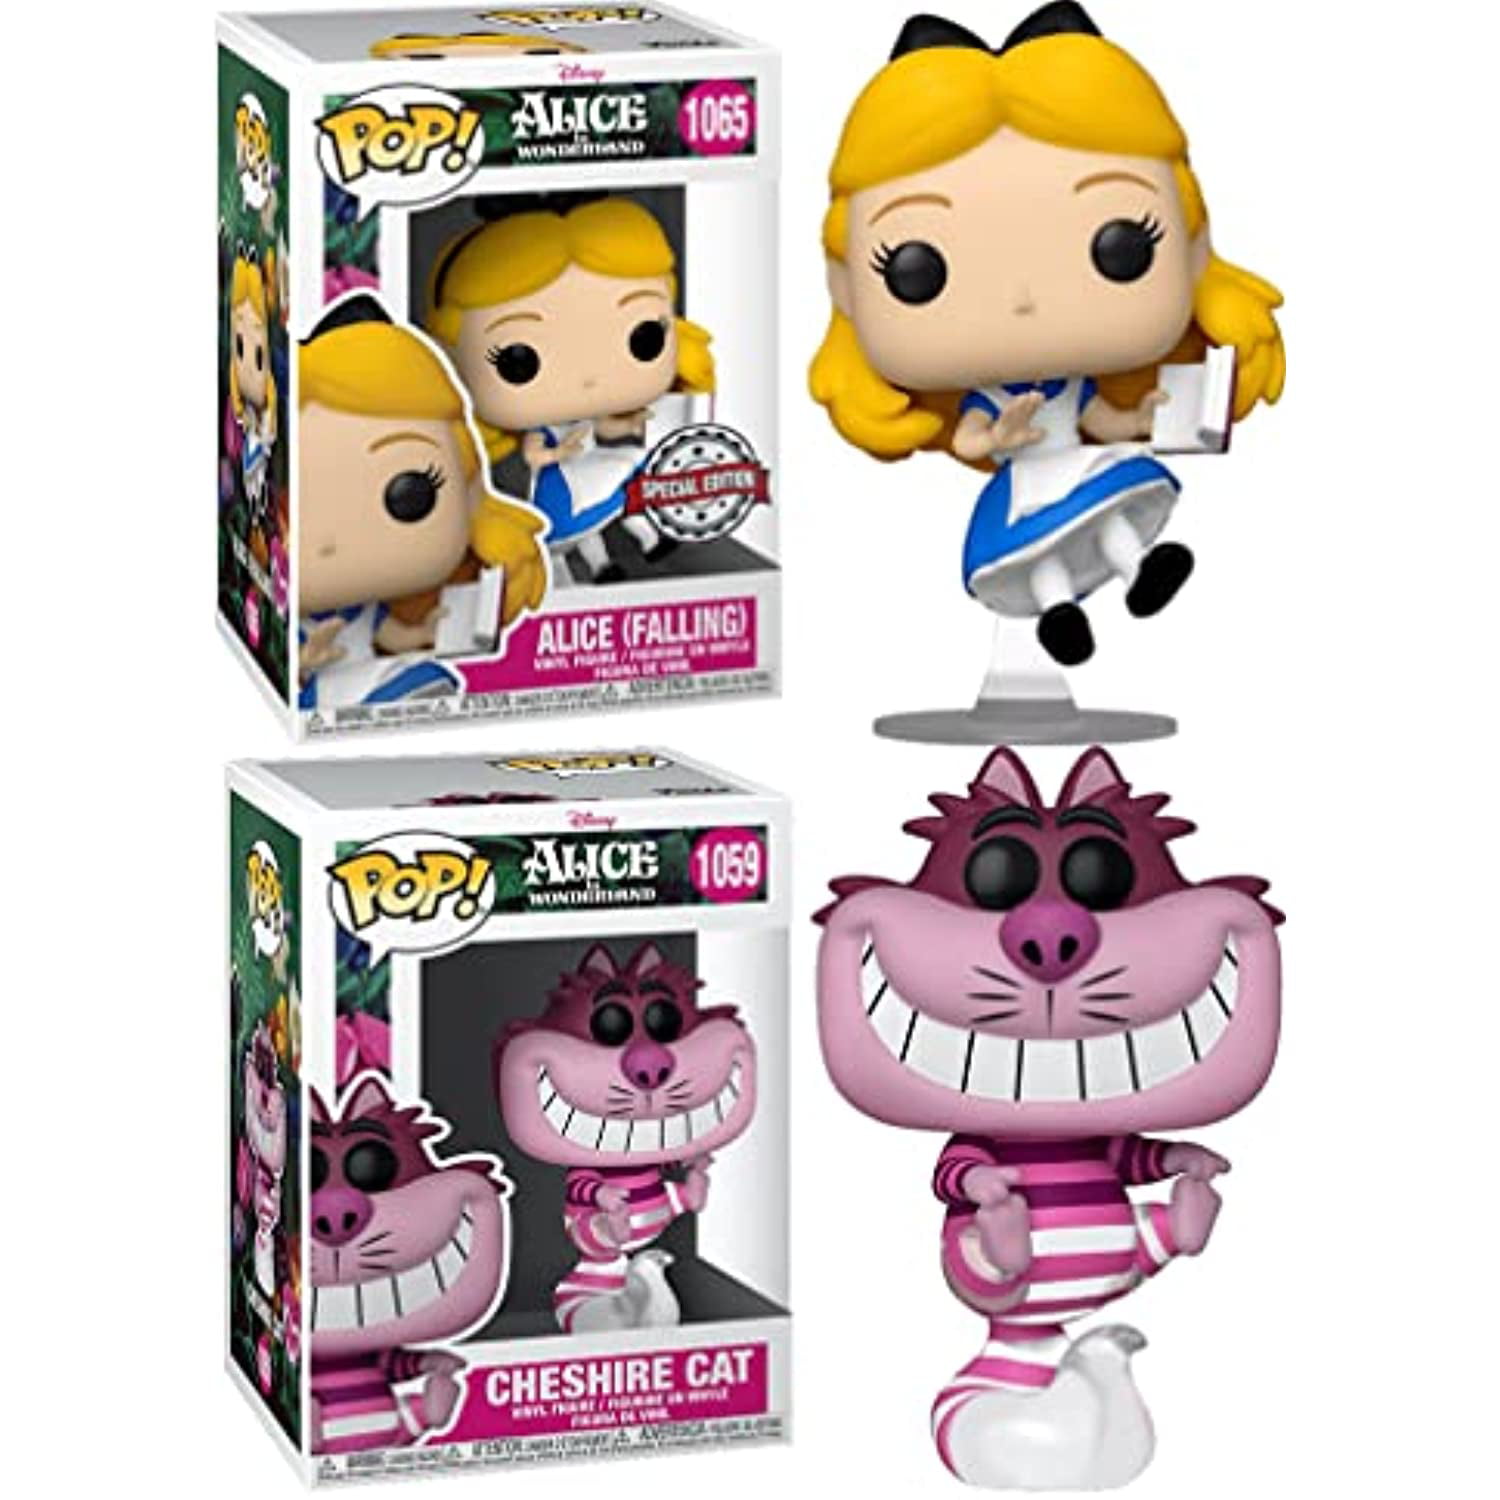 Funko Alice in Wonderland Limited Edition Vaulted Plush set of 4 with  Purple Cheshire cat / only 500 sets made.